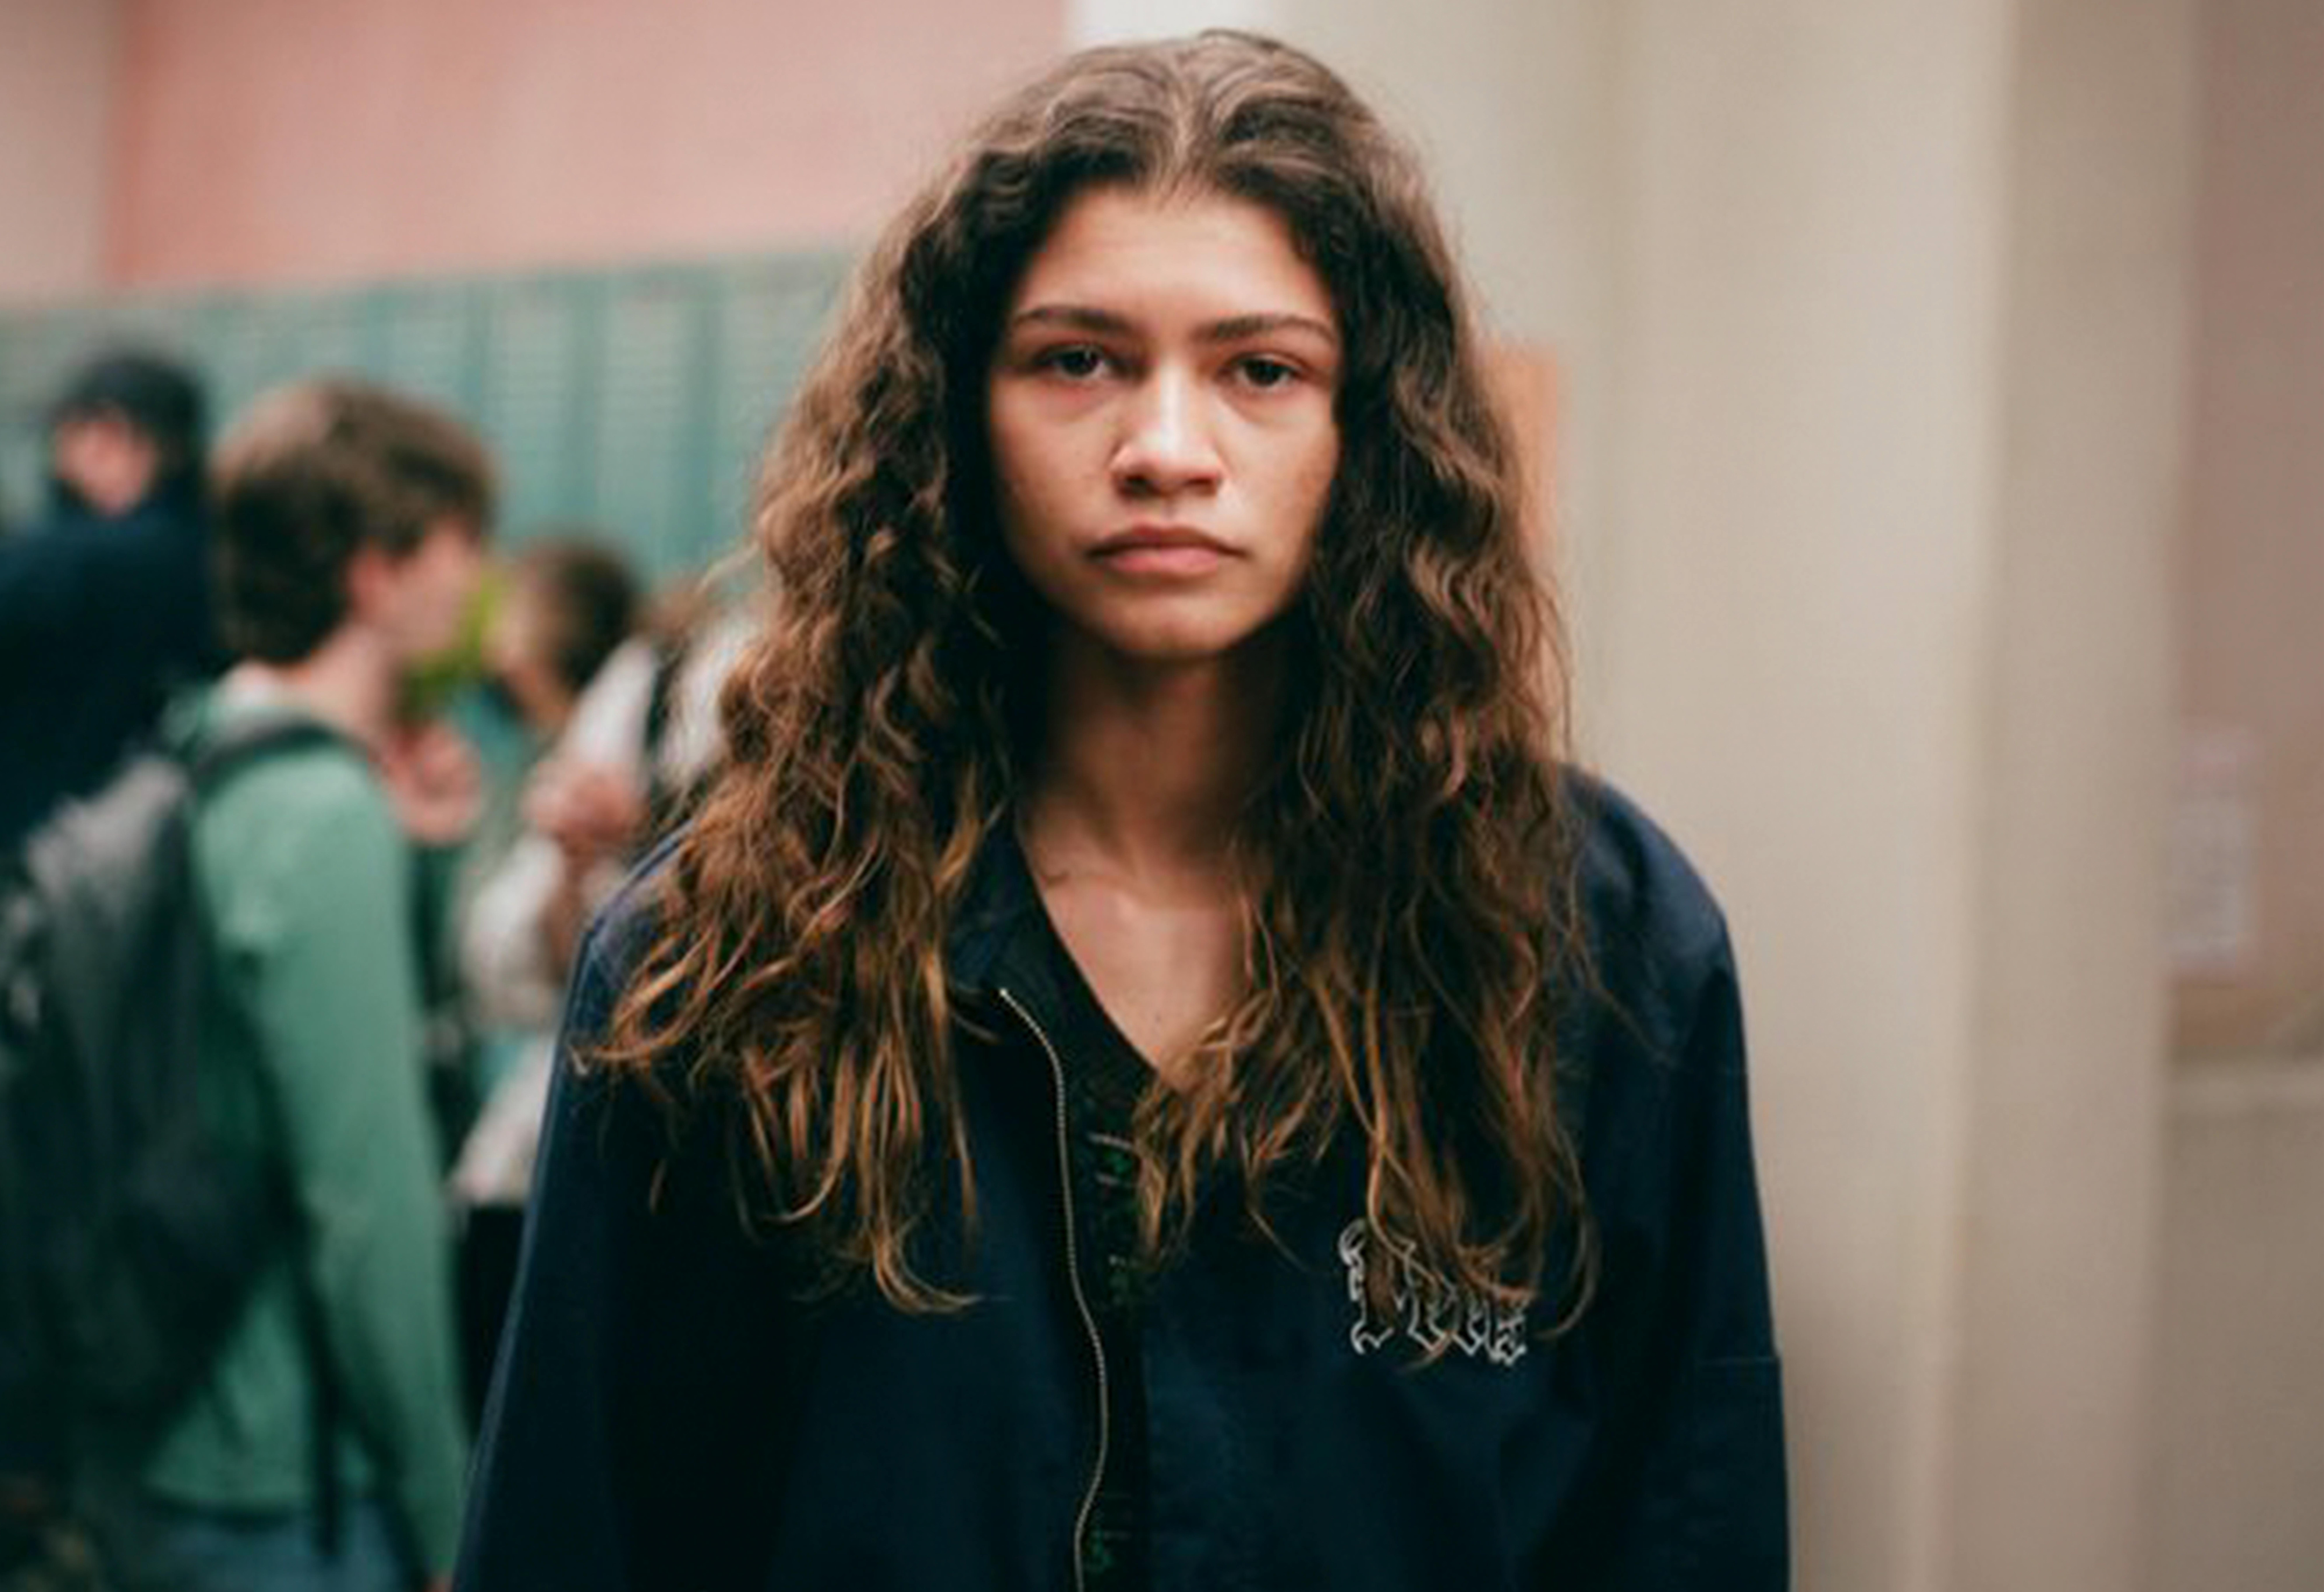 Euphoria Becomes The Second Most-Watched Series in HBO